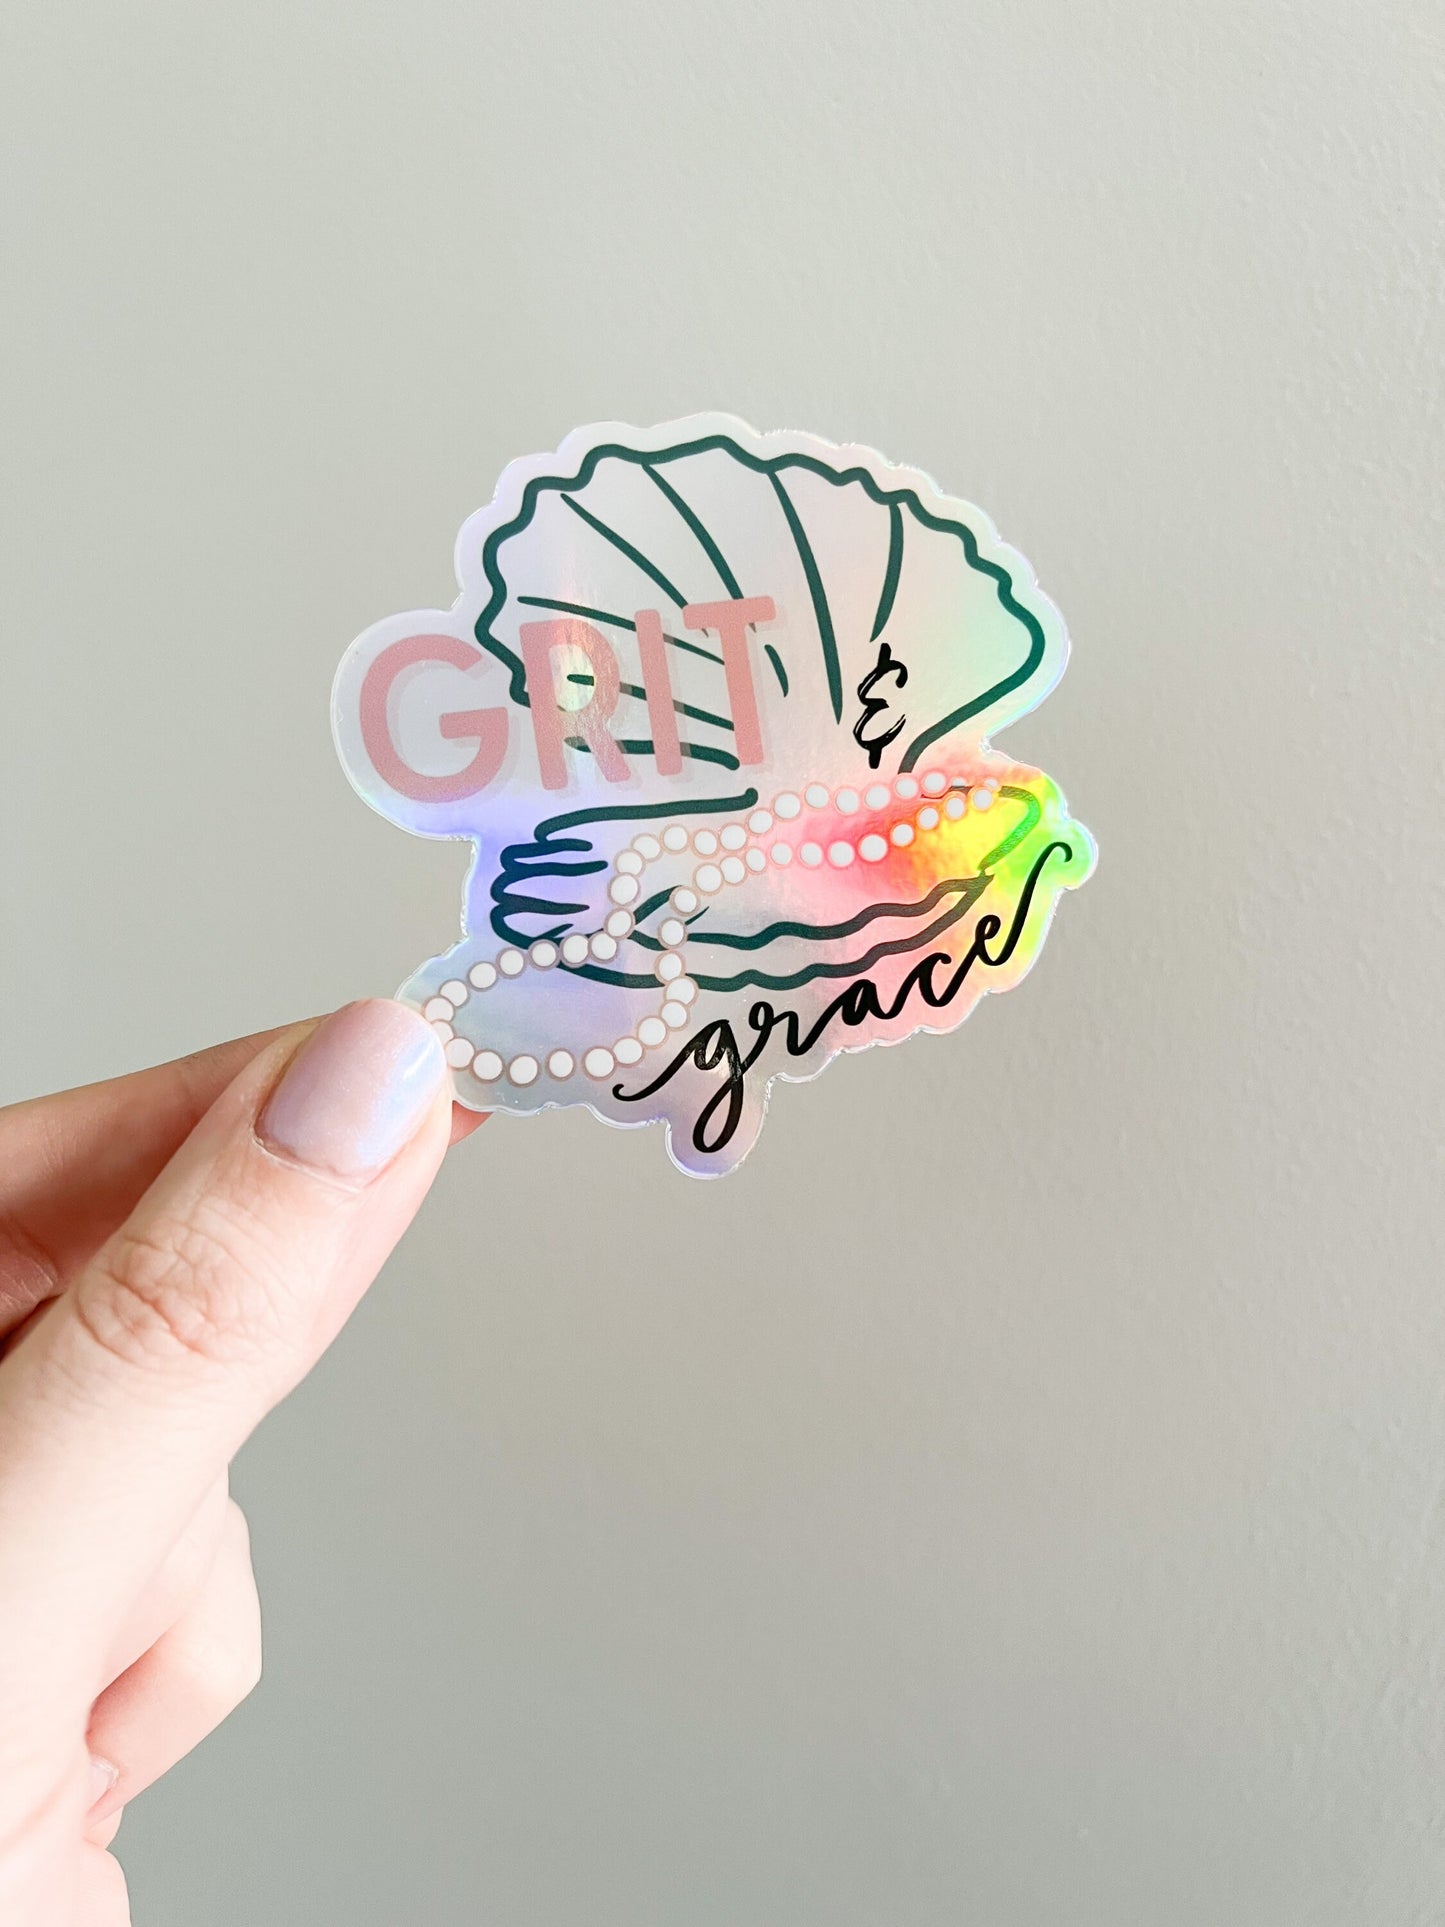 Grit and grace -pearl necklace oyster holographic sticker